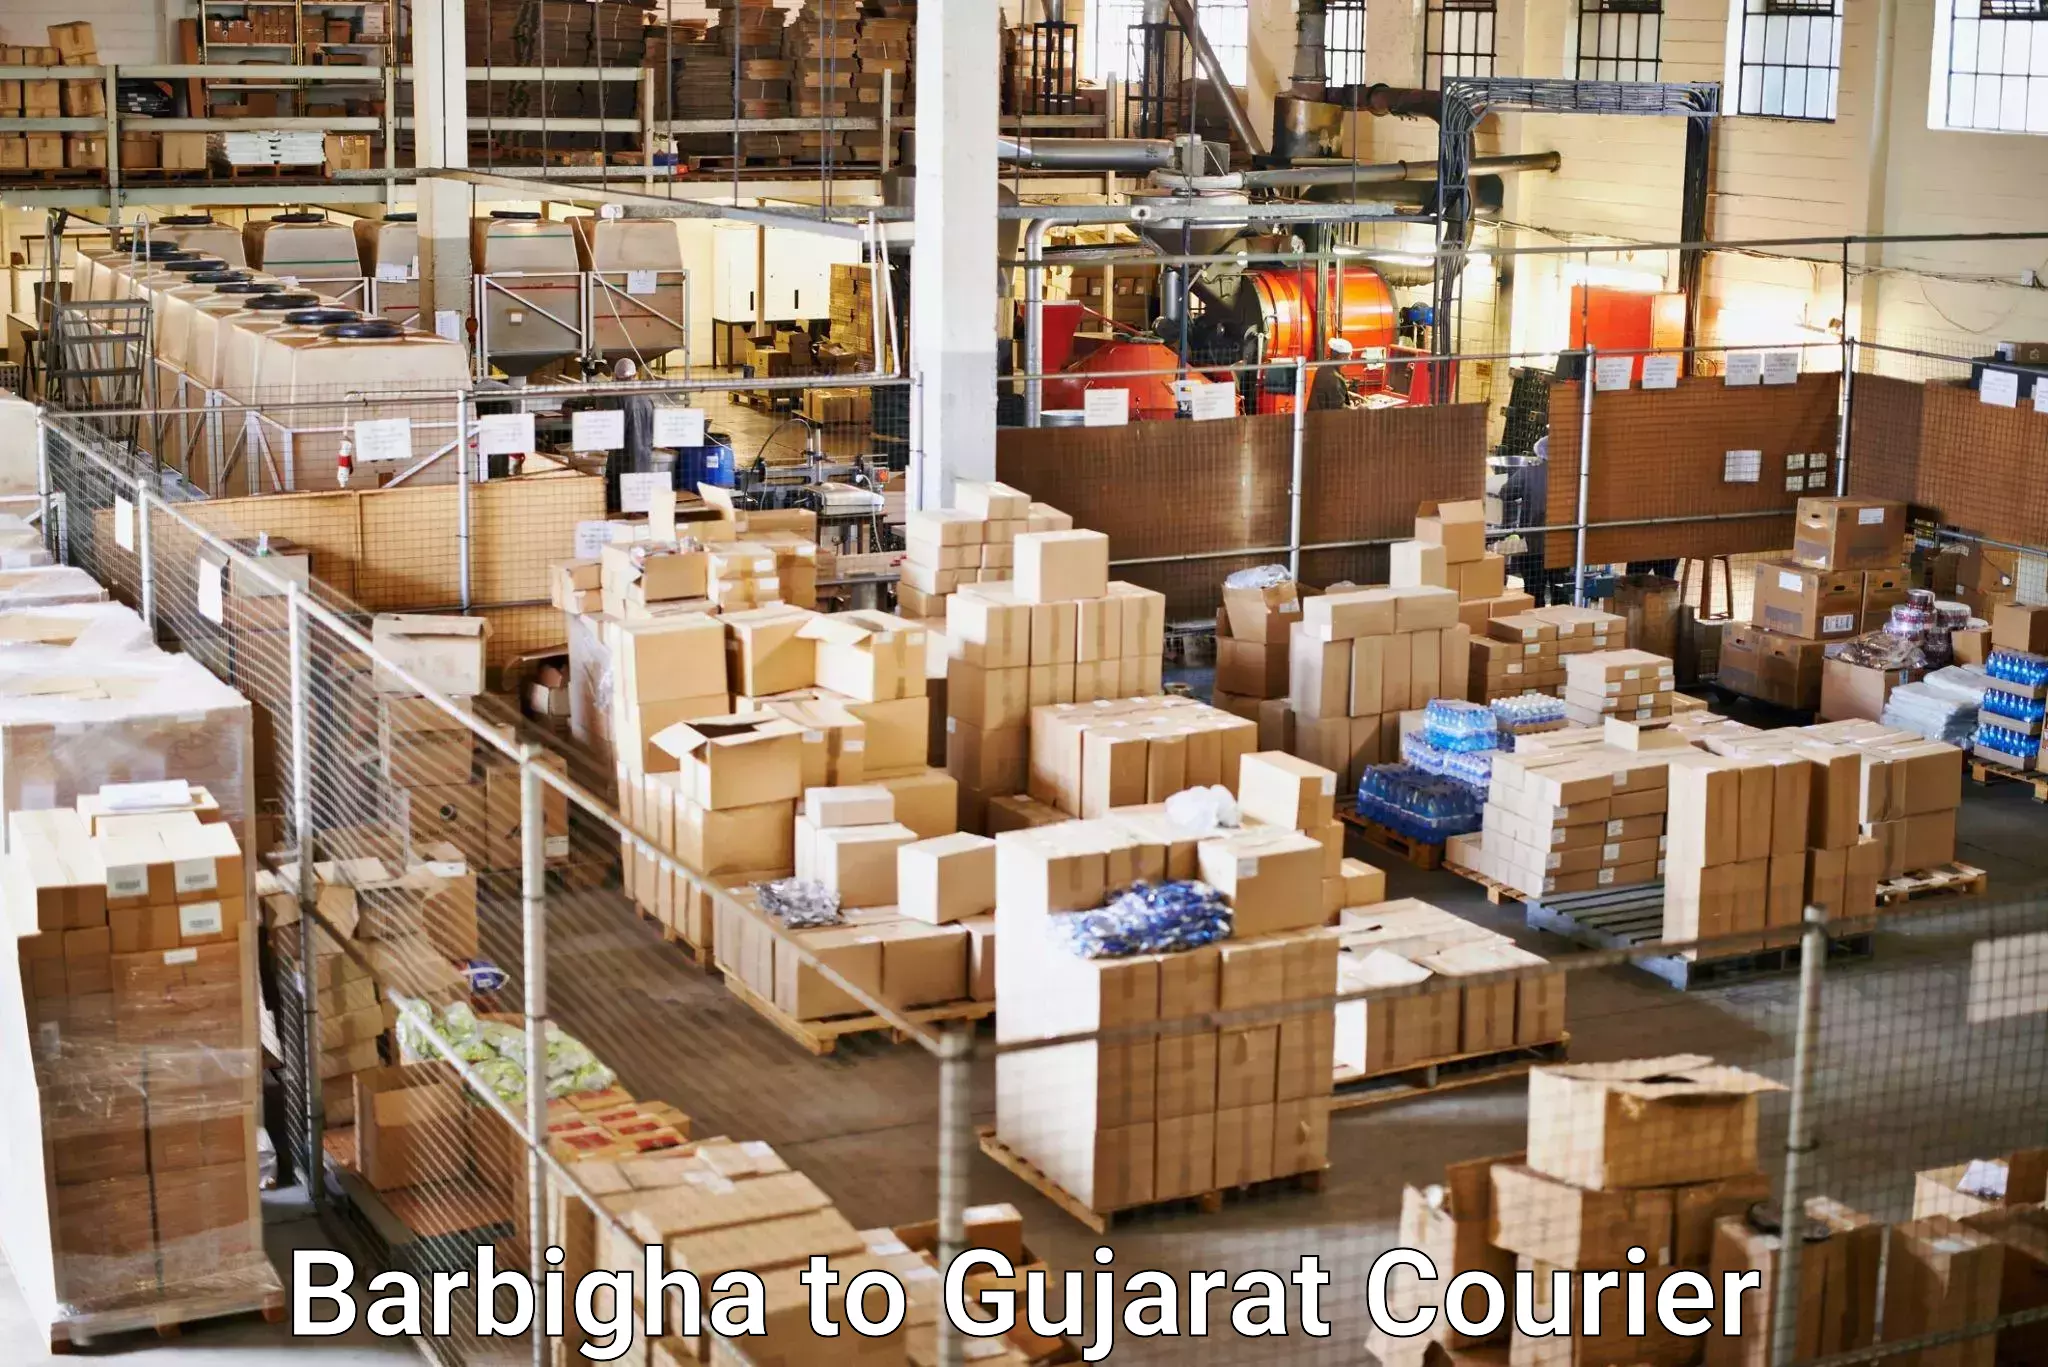 Reliable parcel services Barbigha to Gujarat